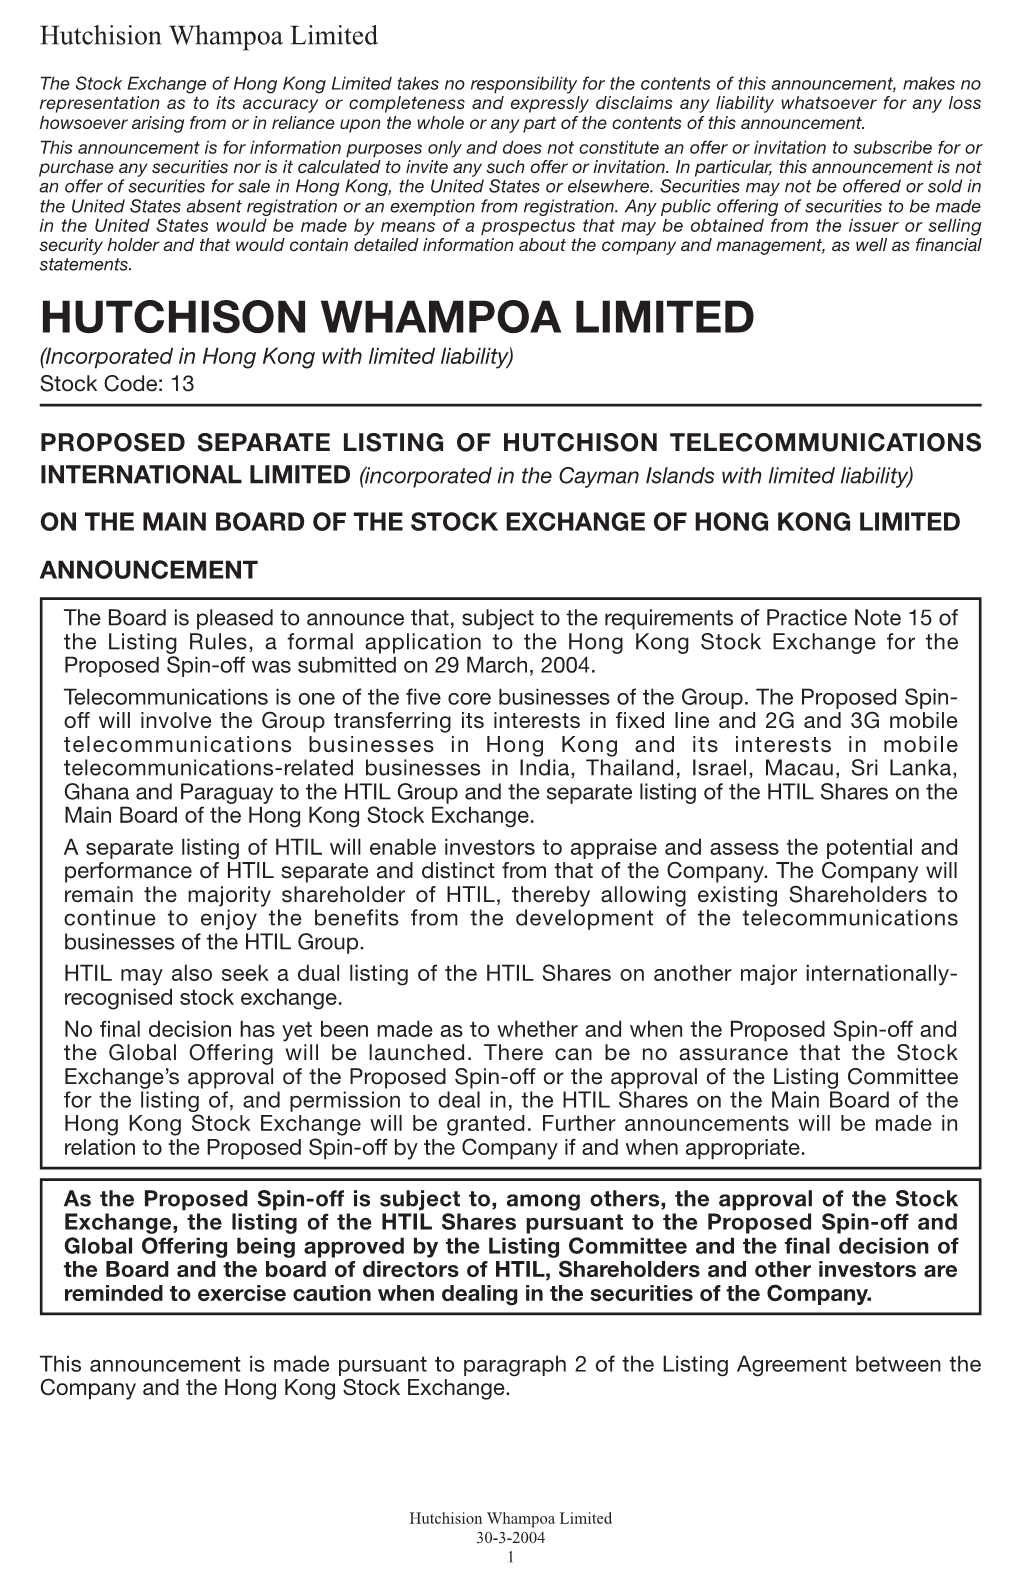 HUTCHISON WHAMPOA LIMITED (Incorporated in Hong Kong with Limited Liability) Stock Code: 13